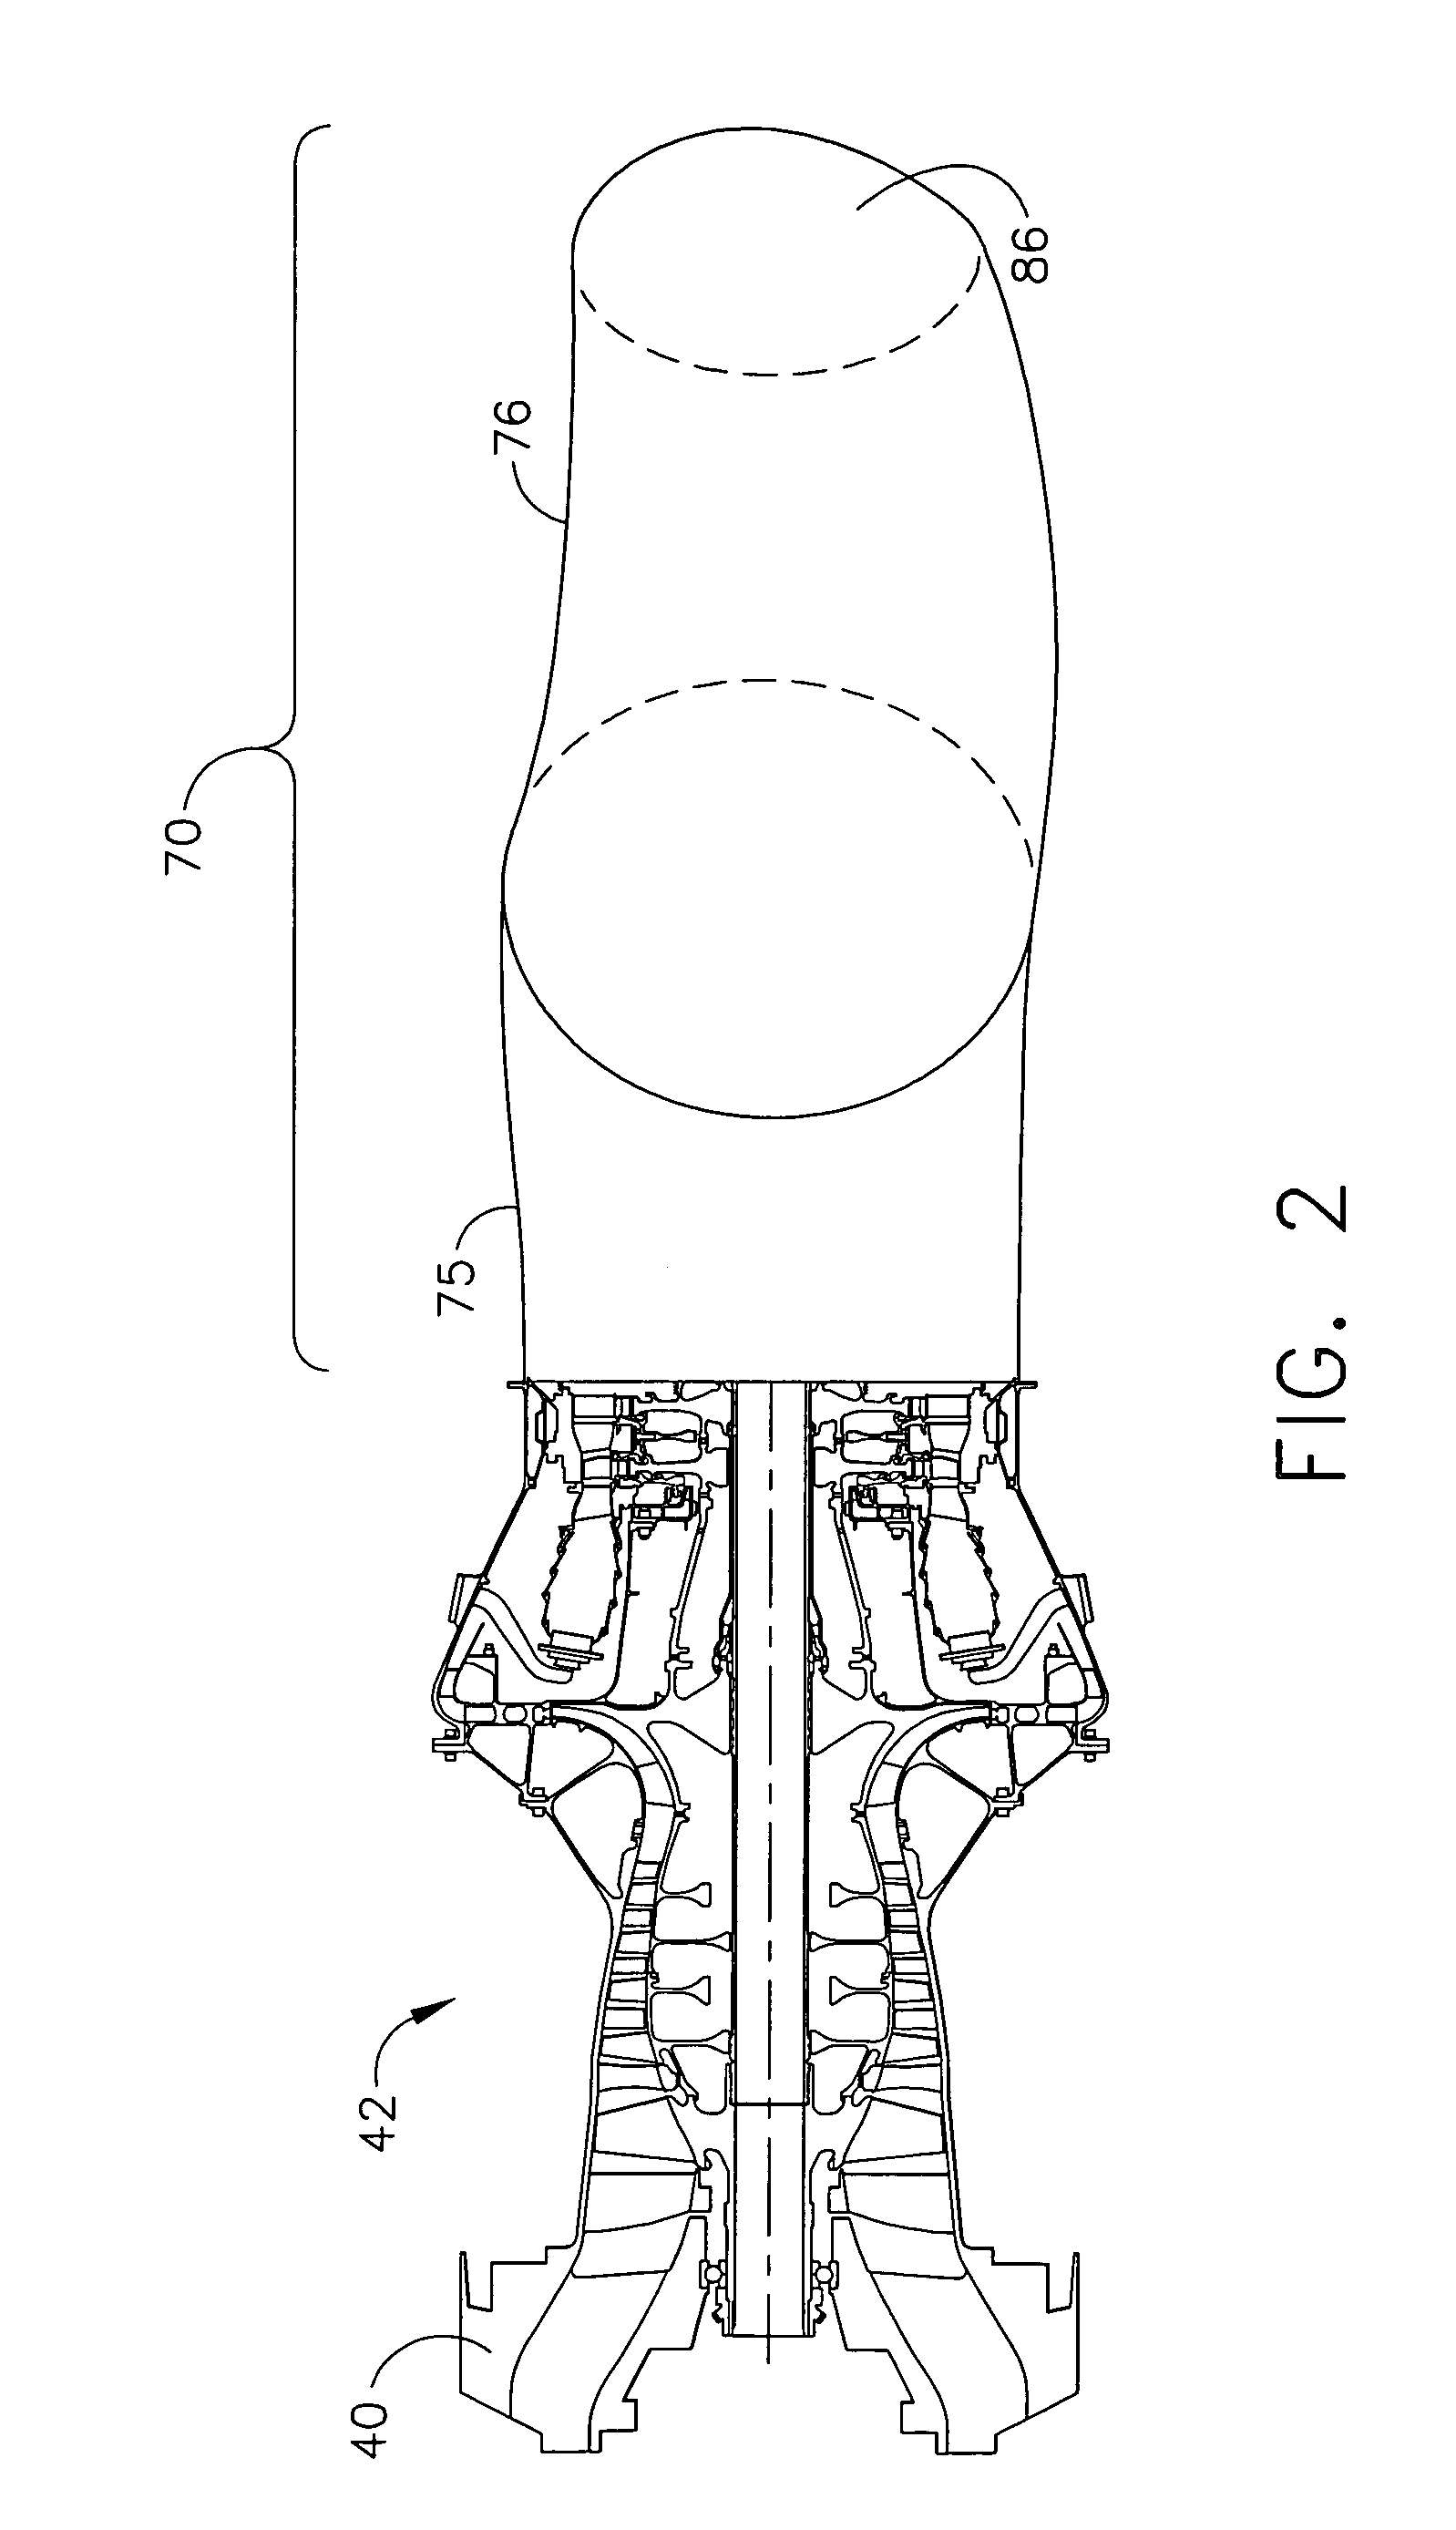 Methods and apparatus for exhausting gases from gas turbine engines